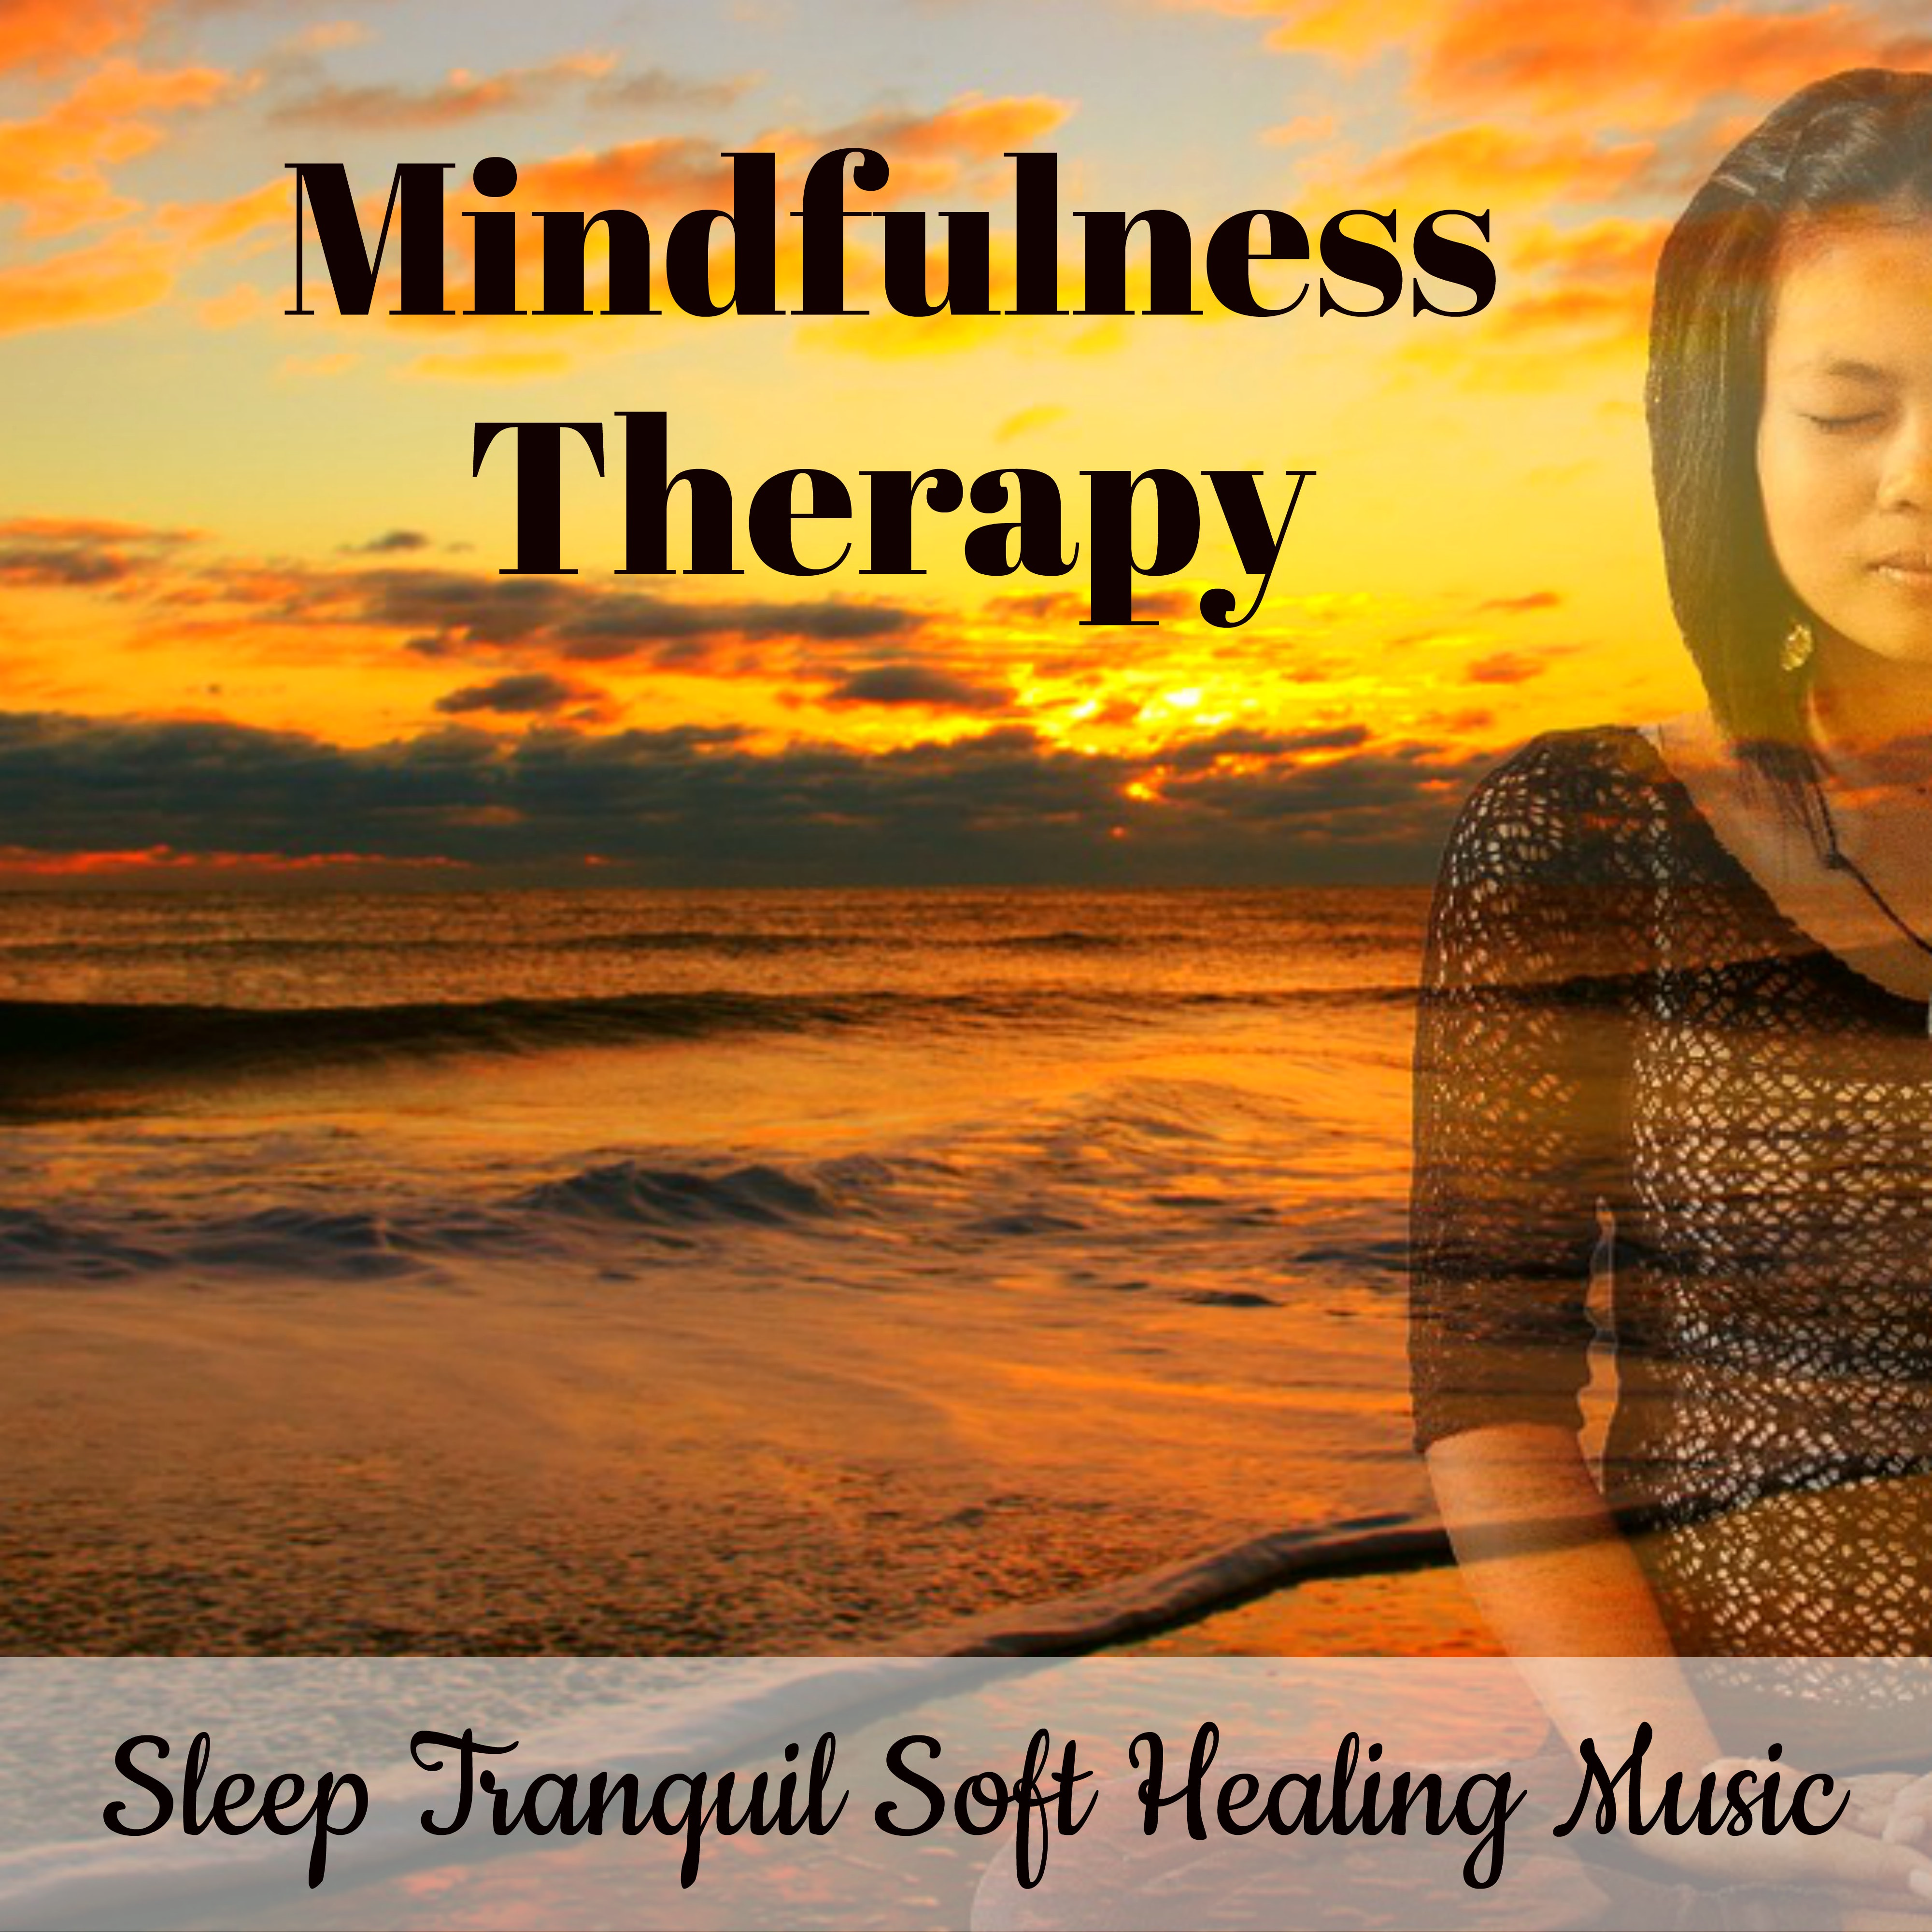 Mindfulness Therapy - Sleep Tranquil Soft Healing Music for Emotional State Mind Exercises Inner Force with New Age Nature Instrumental Sounds